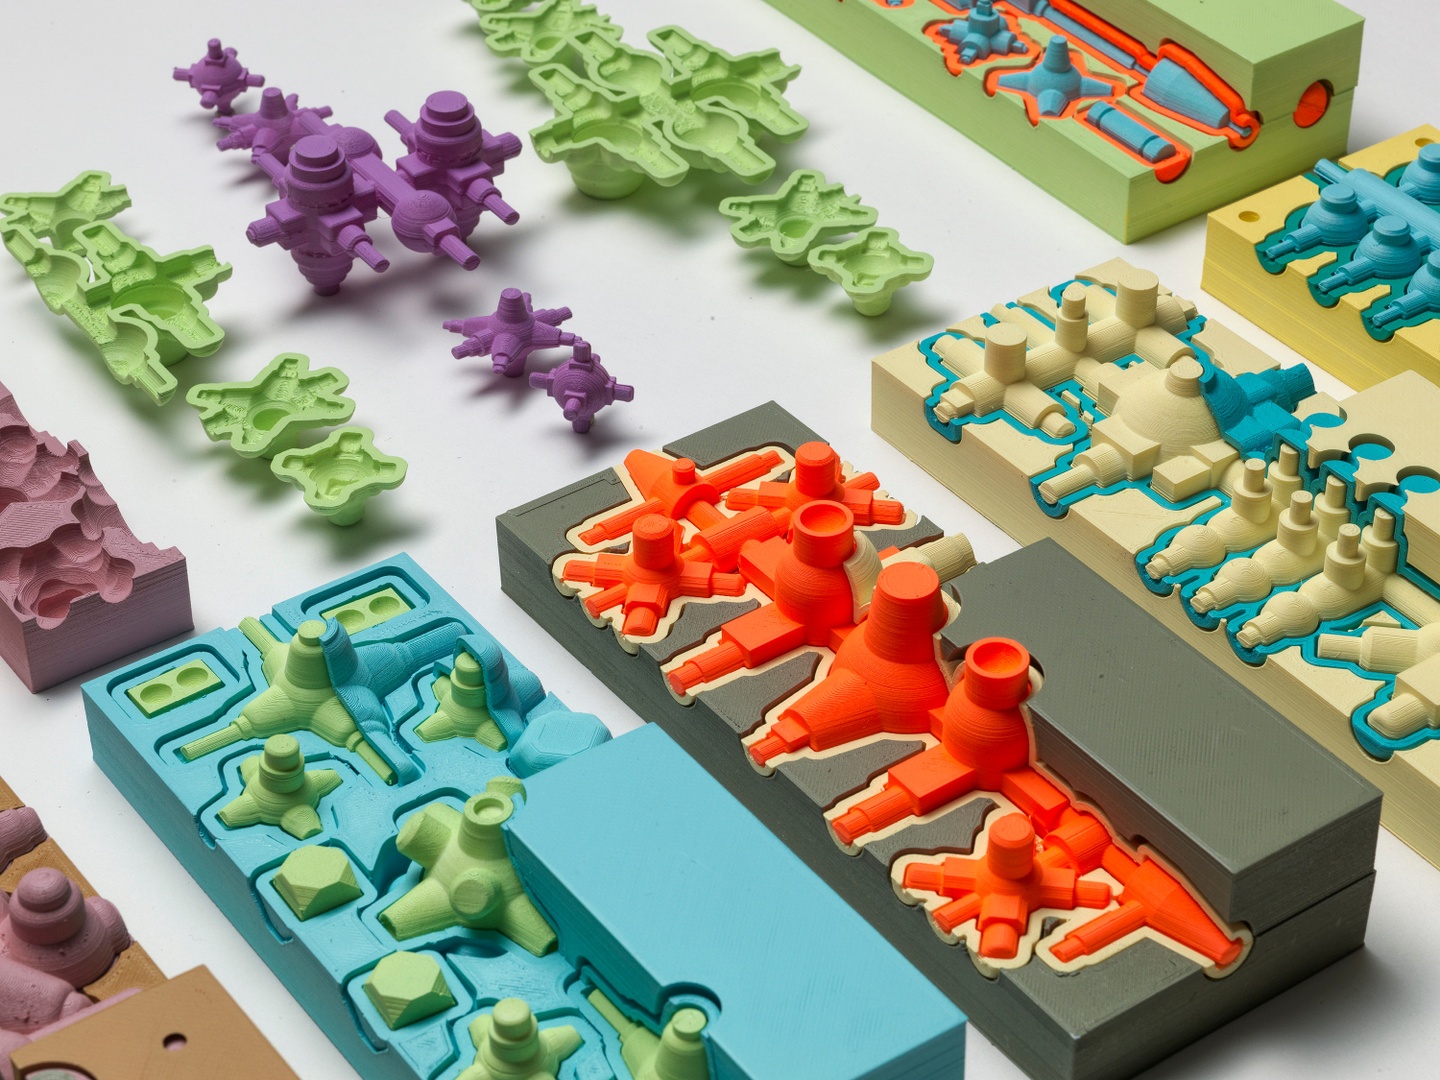 Abstract, brightly colored, 3D printed objects arranged on a white background